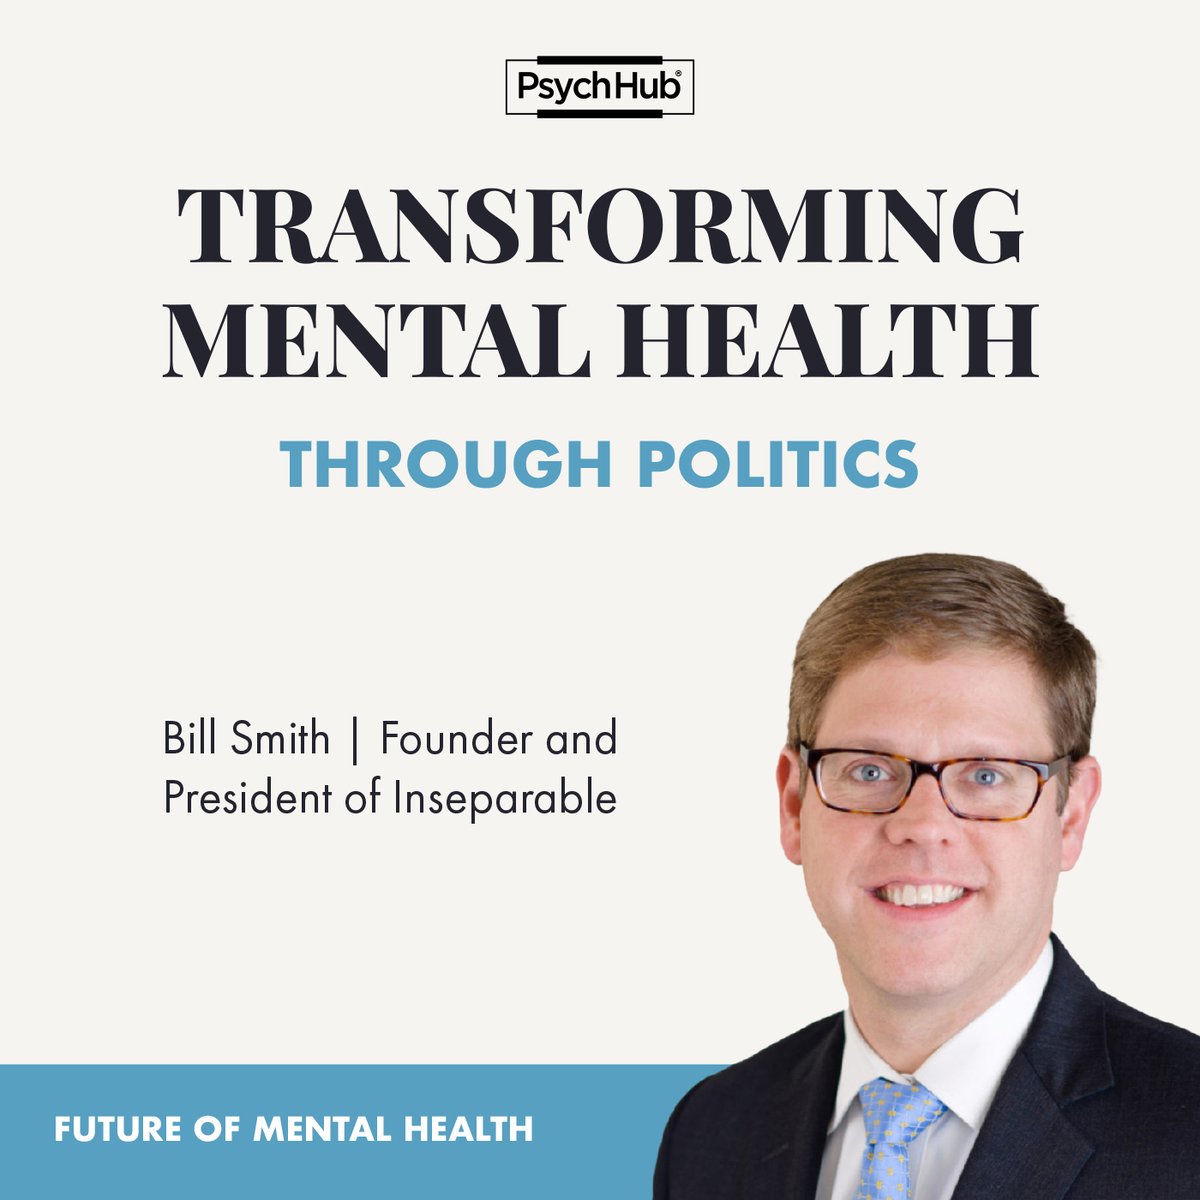 “There ought to be no wrong door and no wrong place to talk about #mentalhealth and what's going on in your life.' - Bill Smith @dcbillsmith